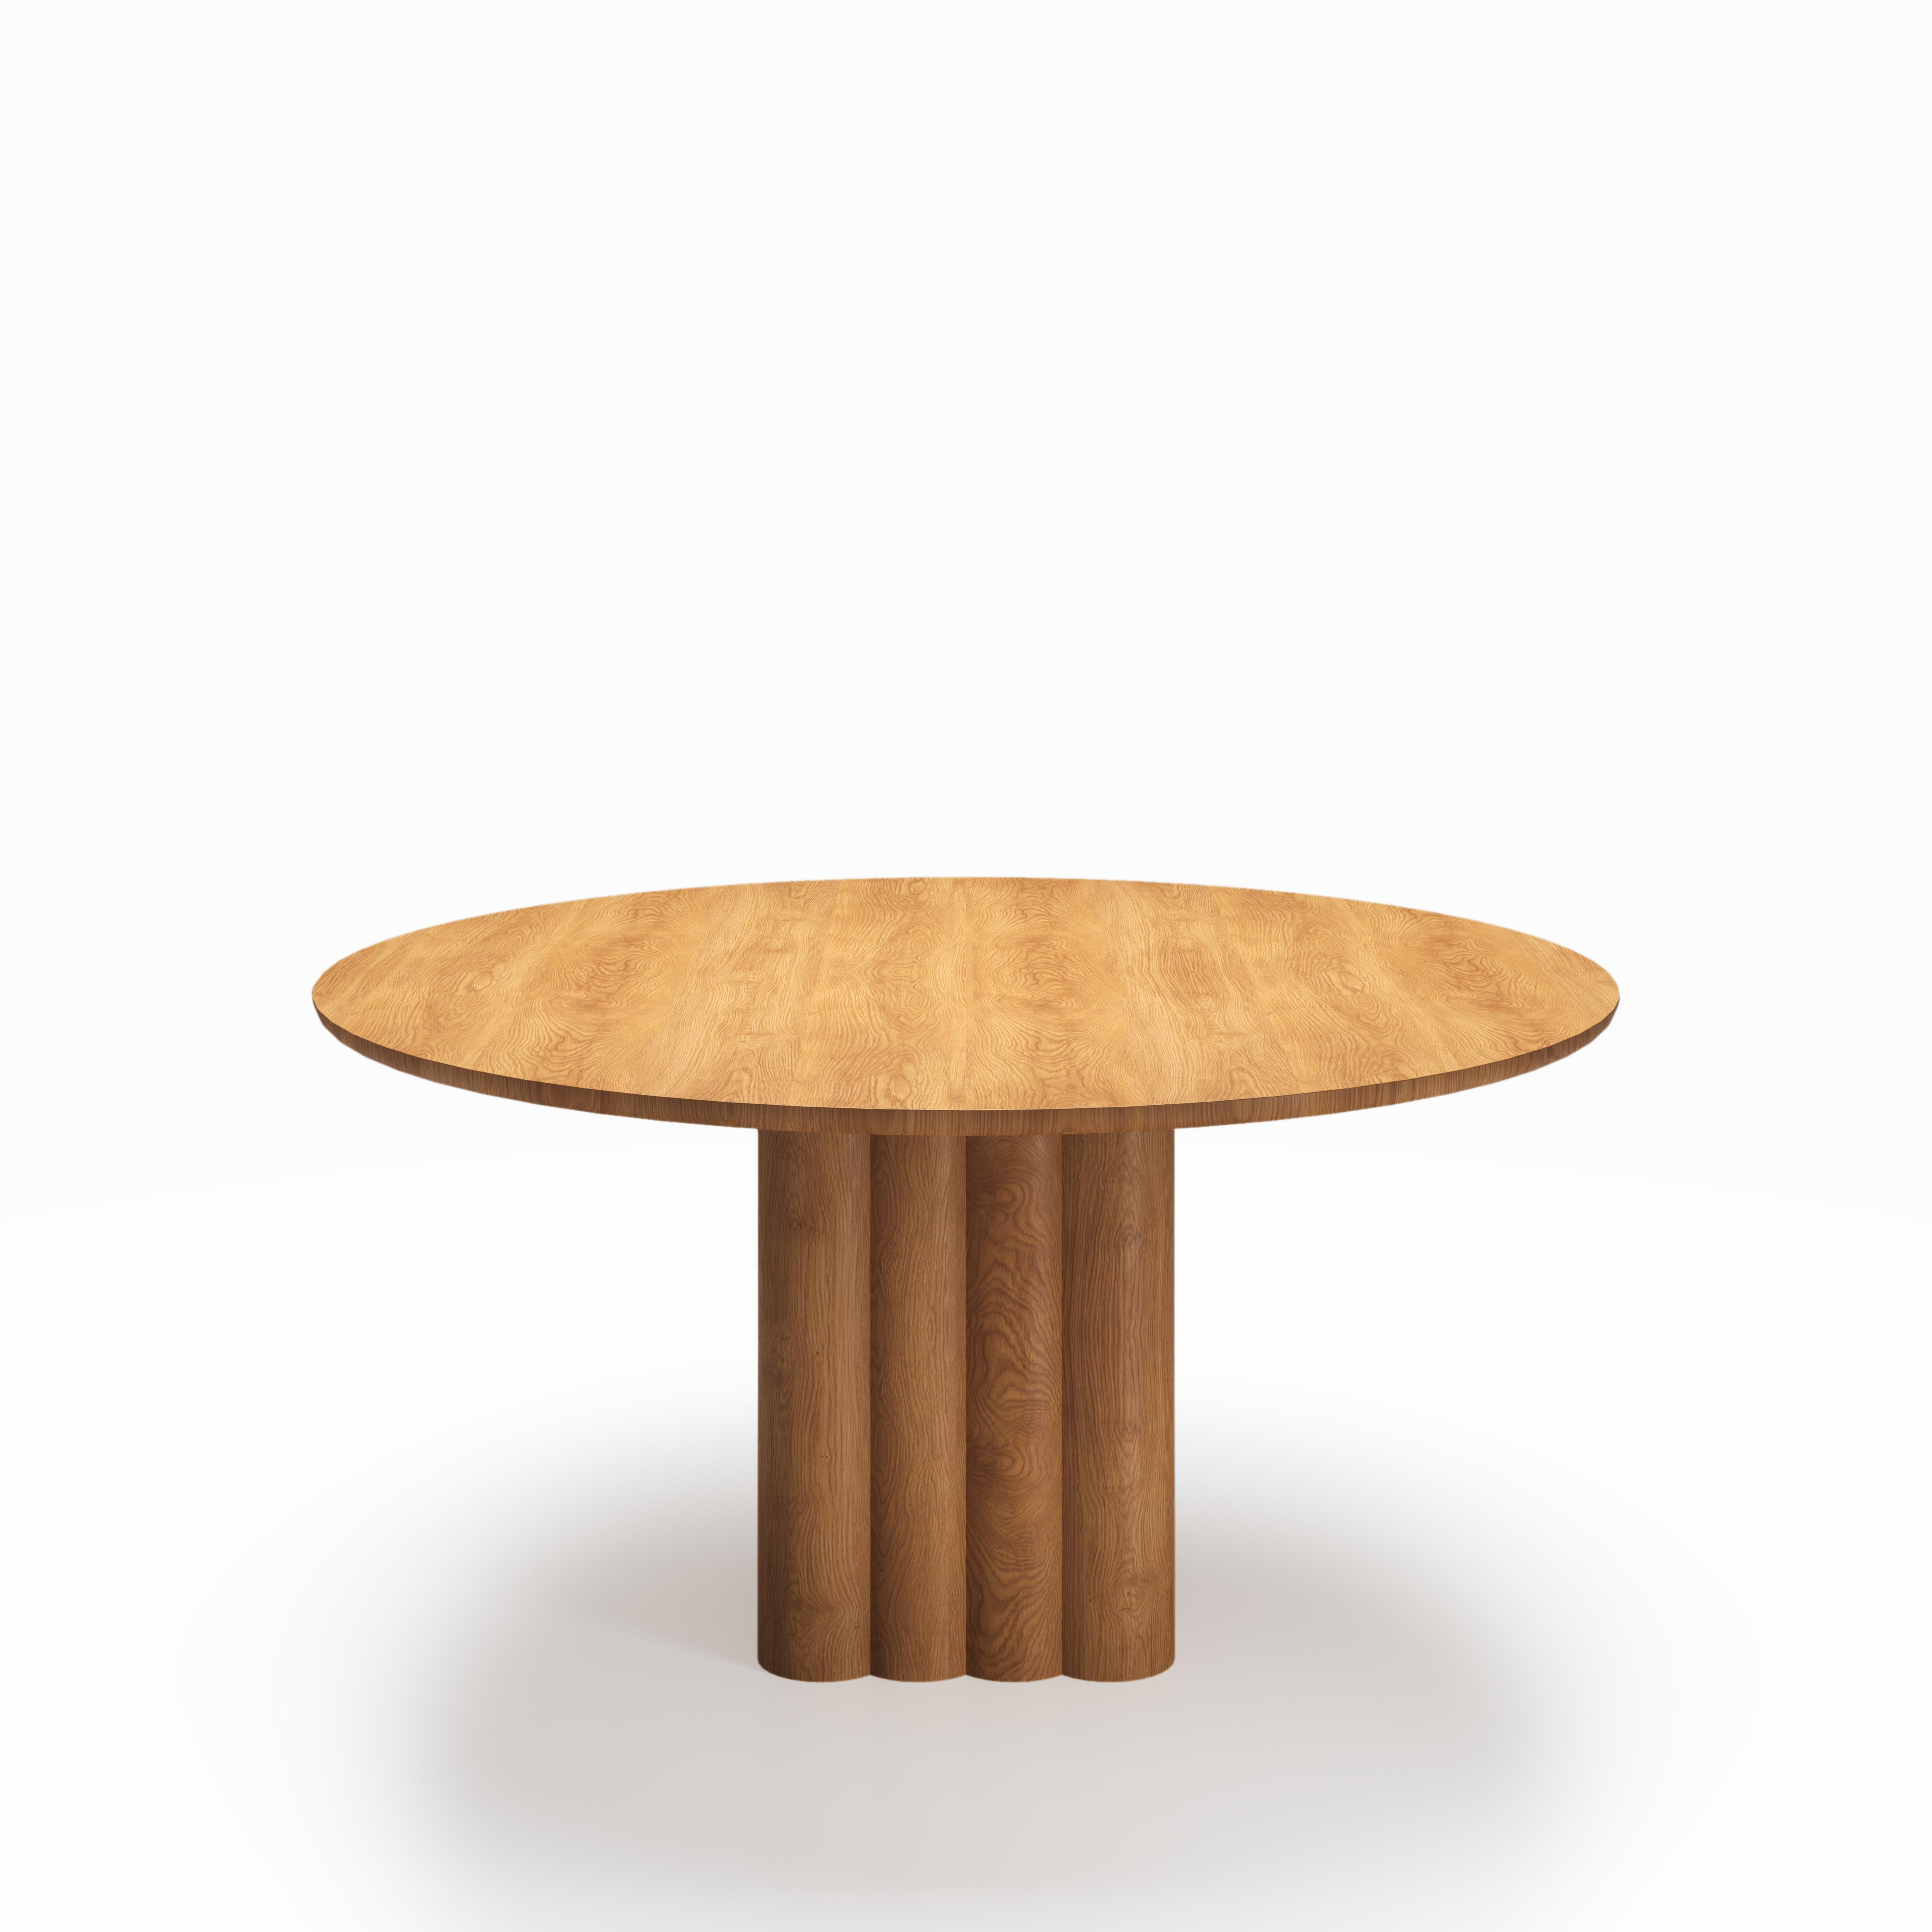 Scandinavian Modern Round Dining Table 'Plush' by Dk3, Natural Oak, 140 cm For Sale